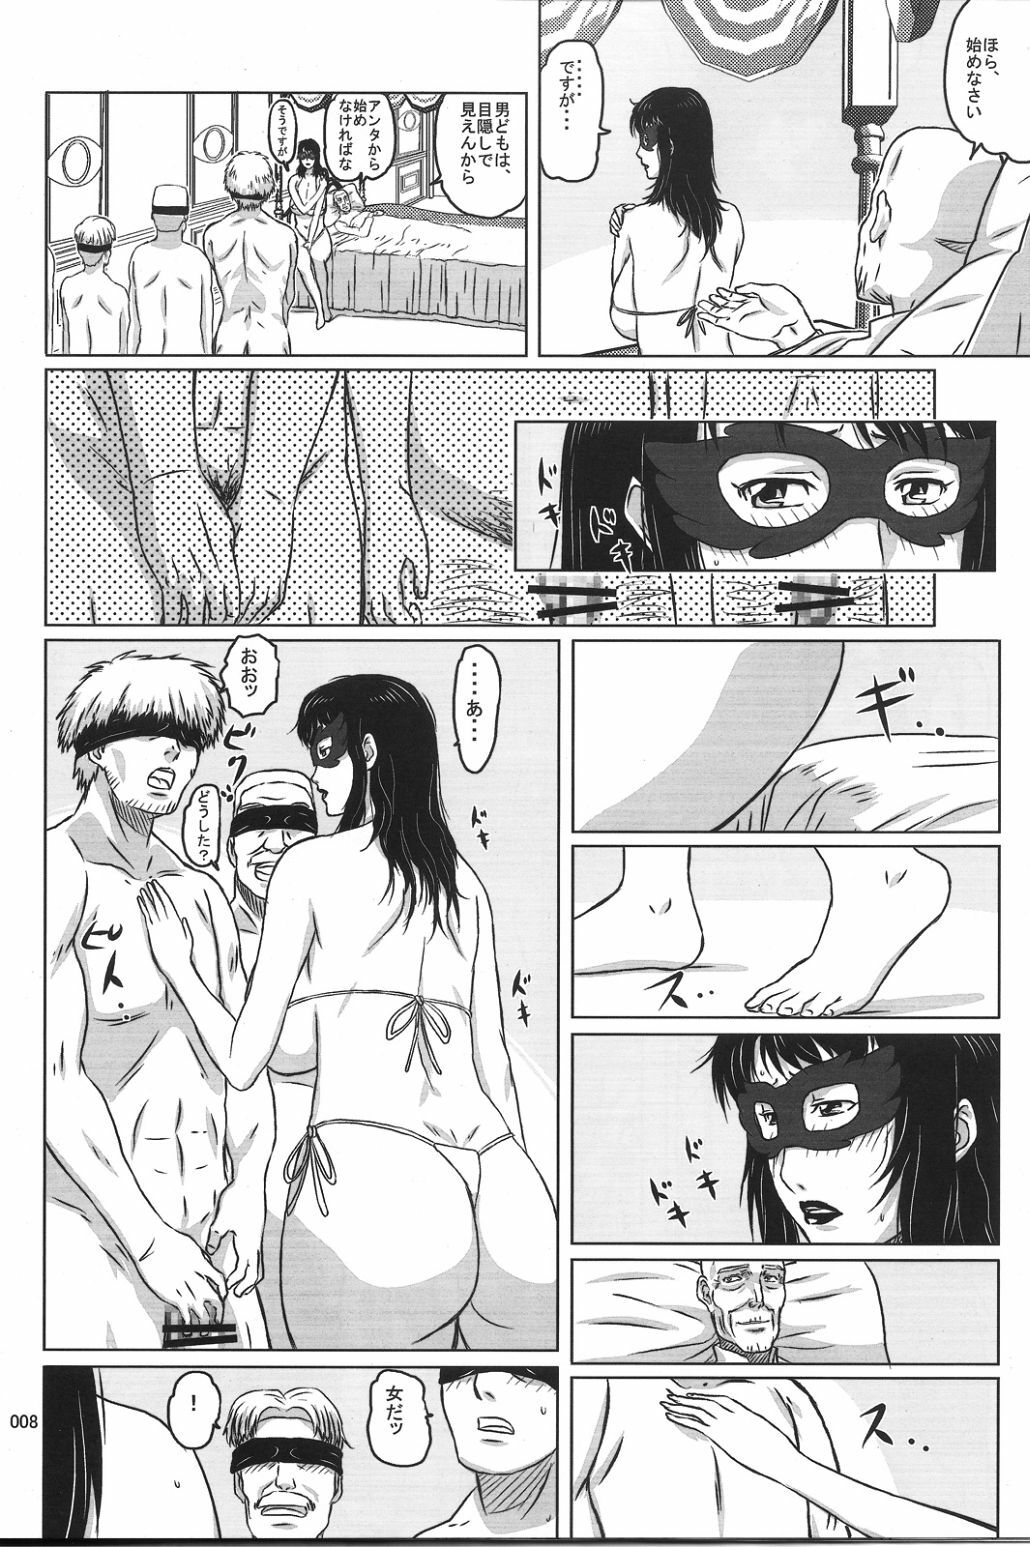 (C81) [Shiawase Pullin Dou (Ninroku)] Package Meat 2.5 (Queen's Blade) page 5 full